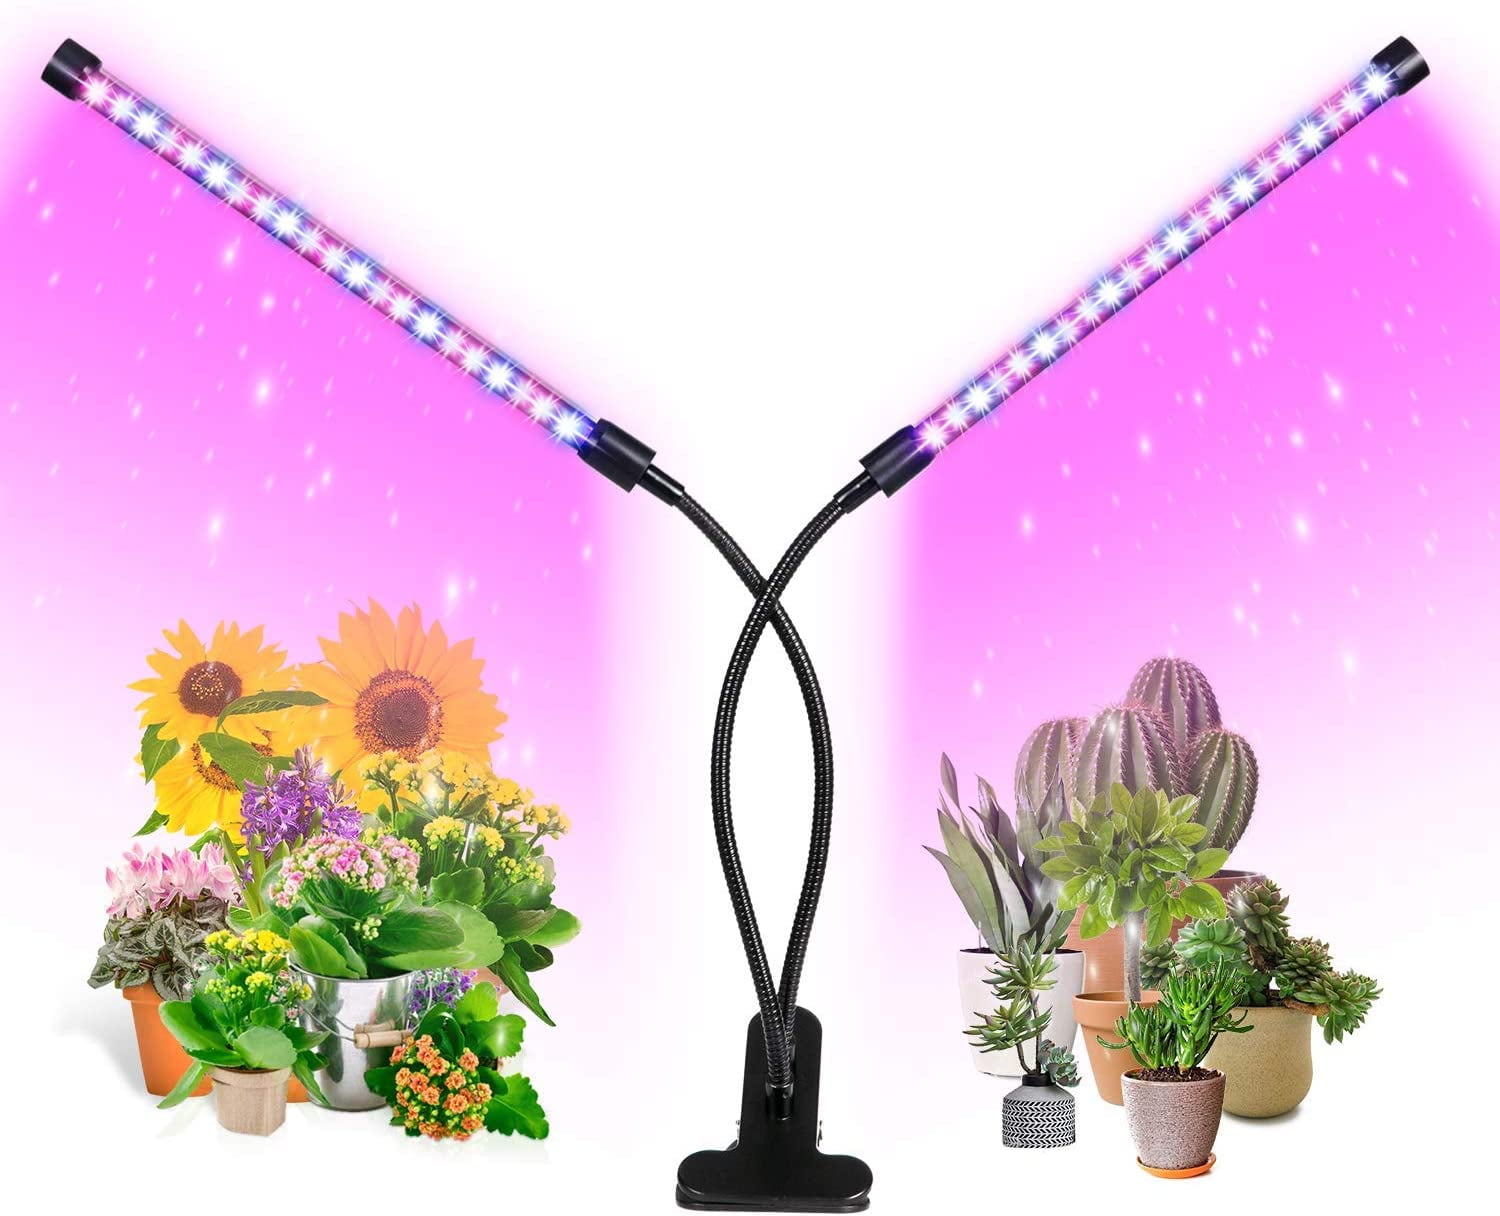 Details about   8000W/2000W LED Grow Light Hydroponic Full Spectrum Indoor Flower Growing L1SH 